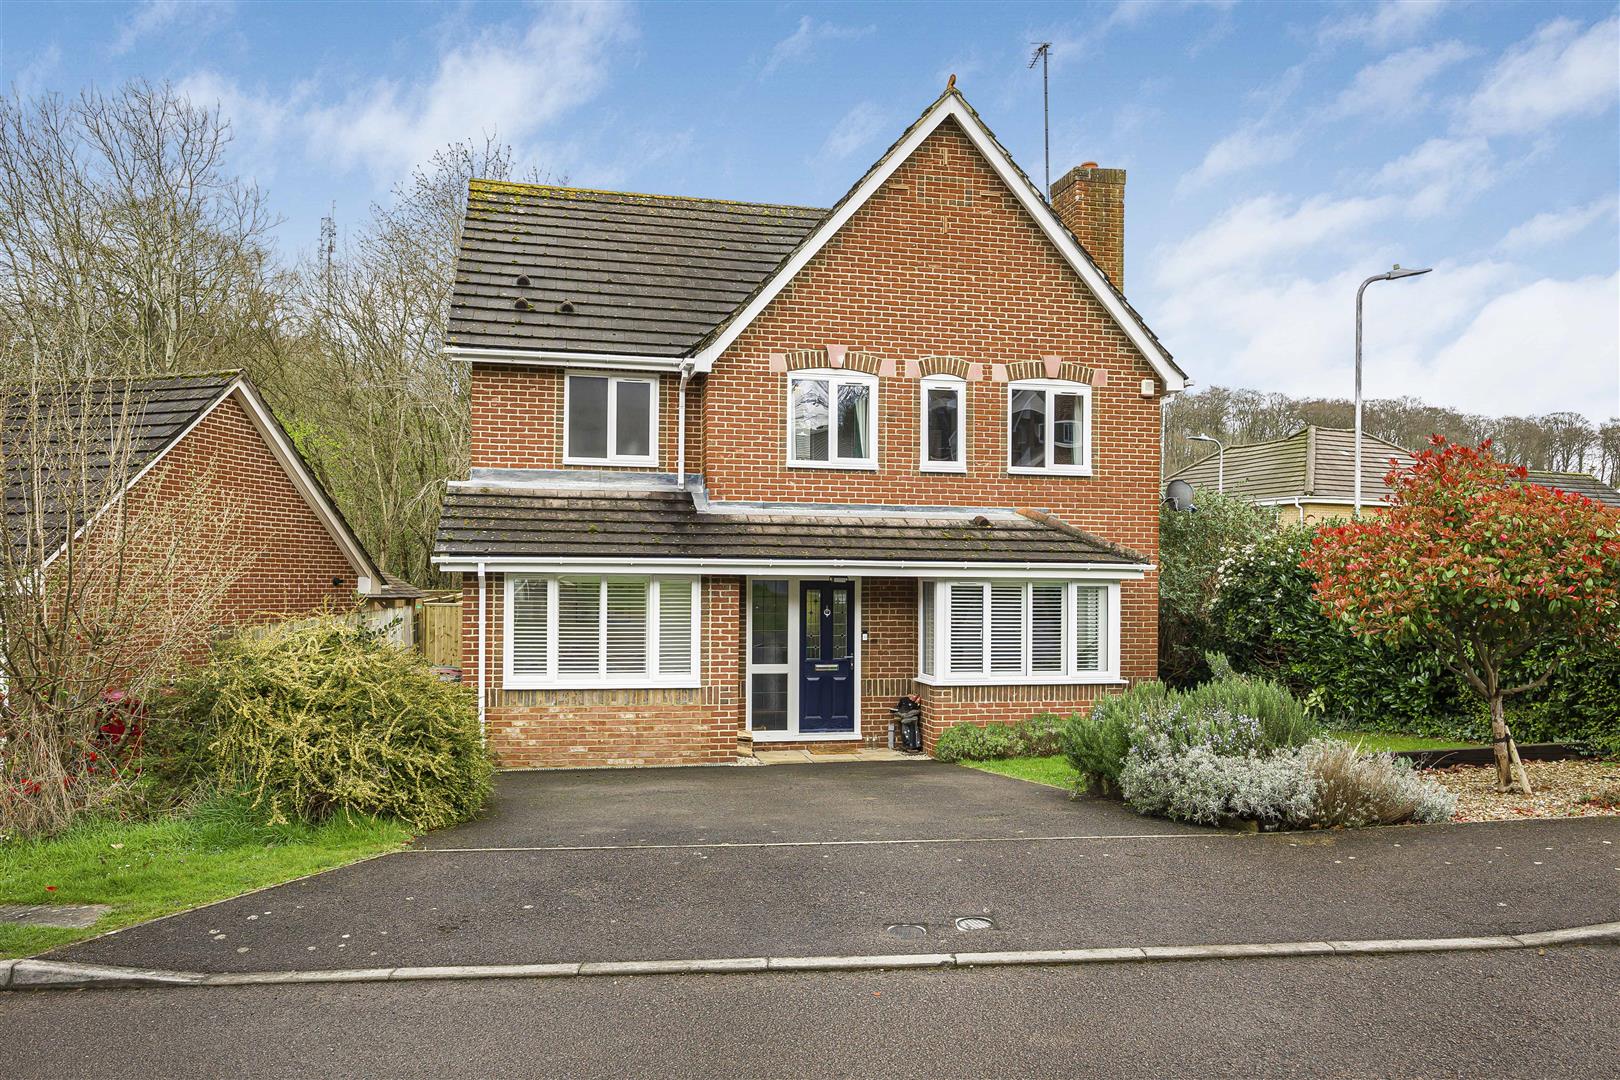 Treforgan Caversham Heights house for sale in Reading